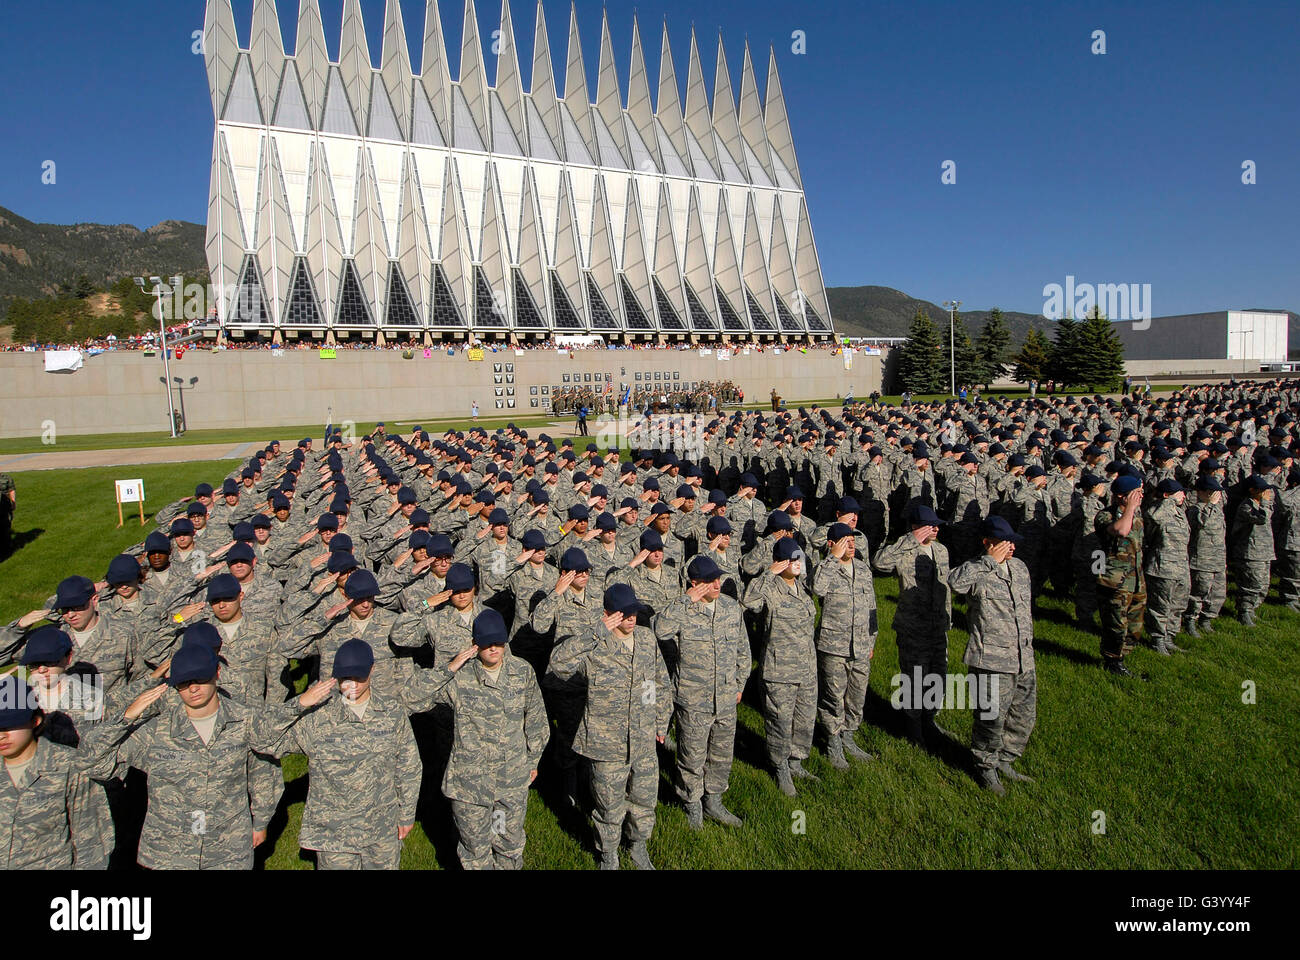 The Class of 2012 salutes during a reveille ceremony. Stock Photo